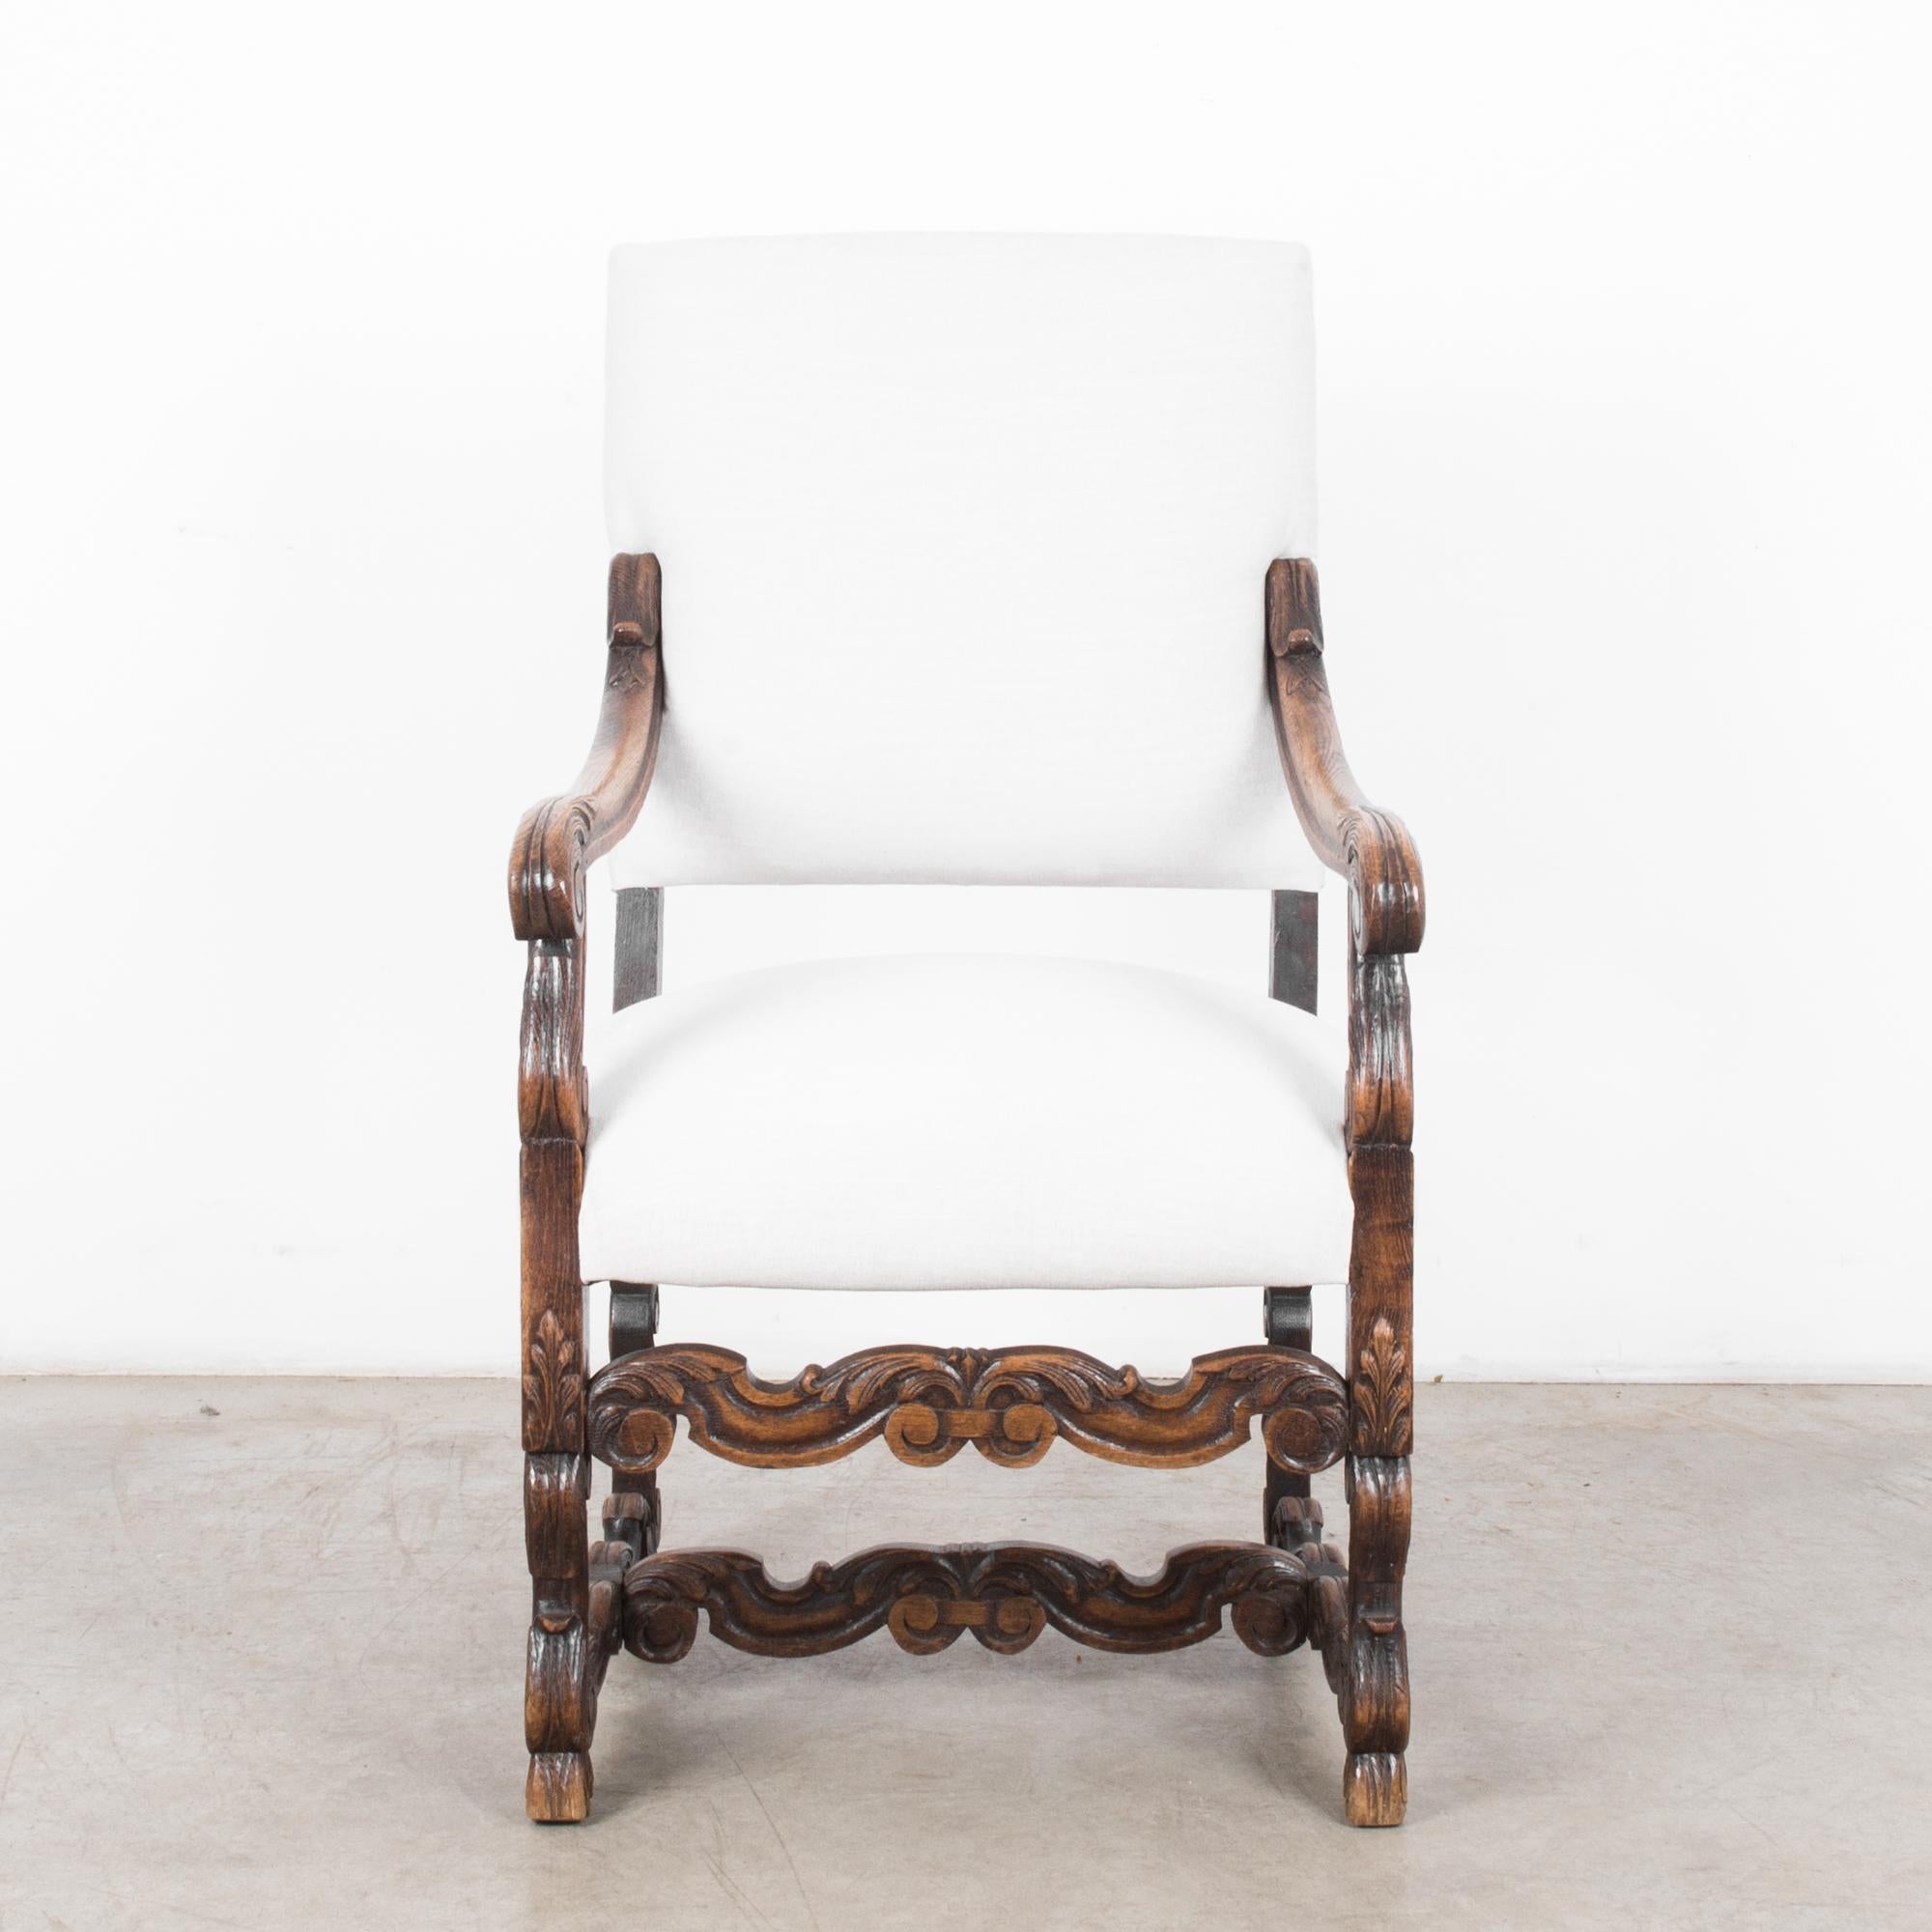 A carved wooden armchair from France, circa 1860, with an upholstered seat and backrest. The upright frame of dark, softly polished wood is carved with distinctive acanthus leaf motifs. Leafy scrolls and unfurling foliage, the slope of the carved